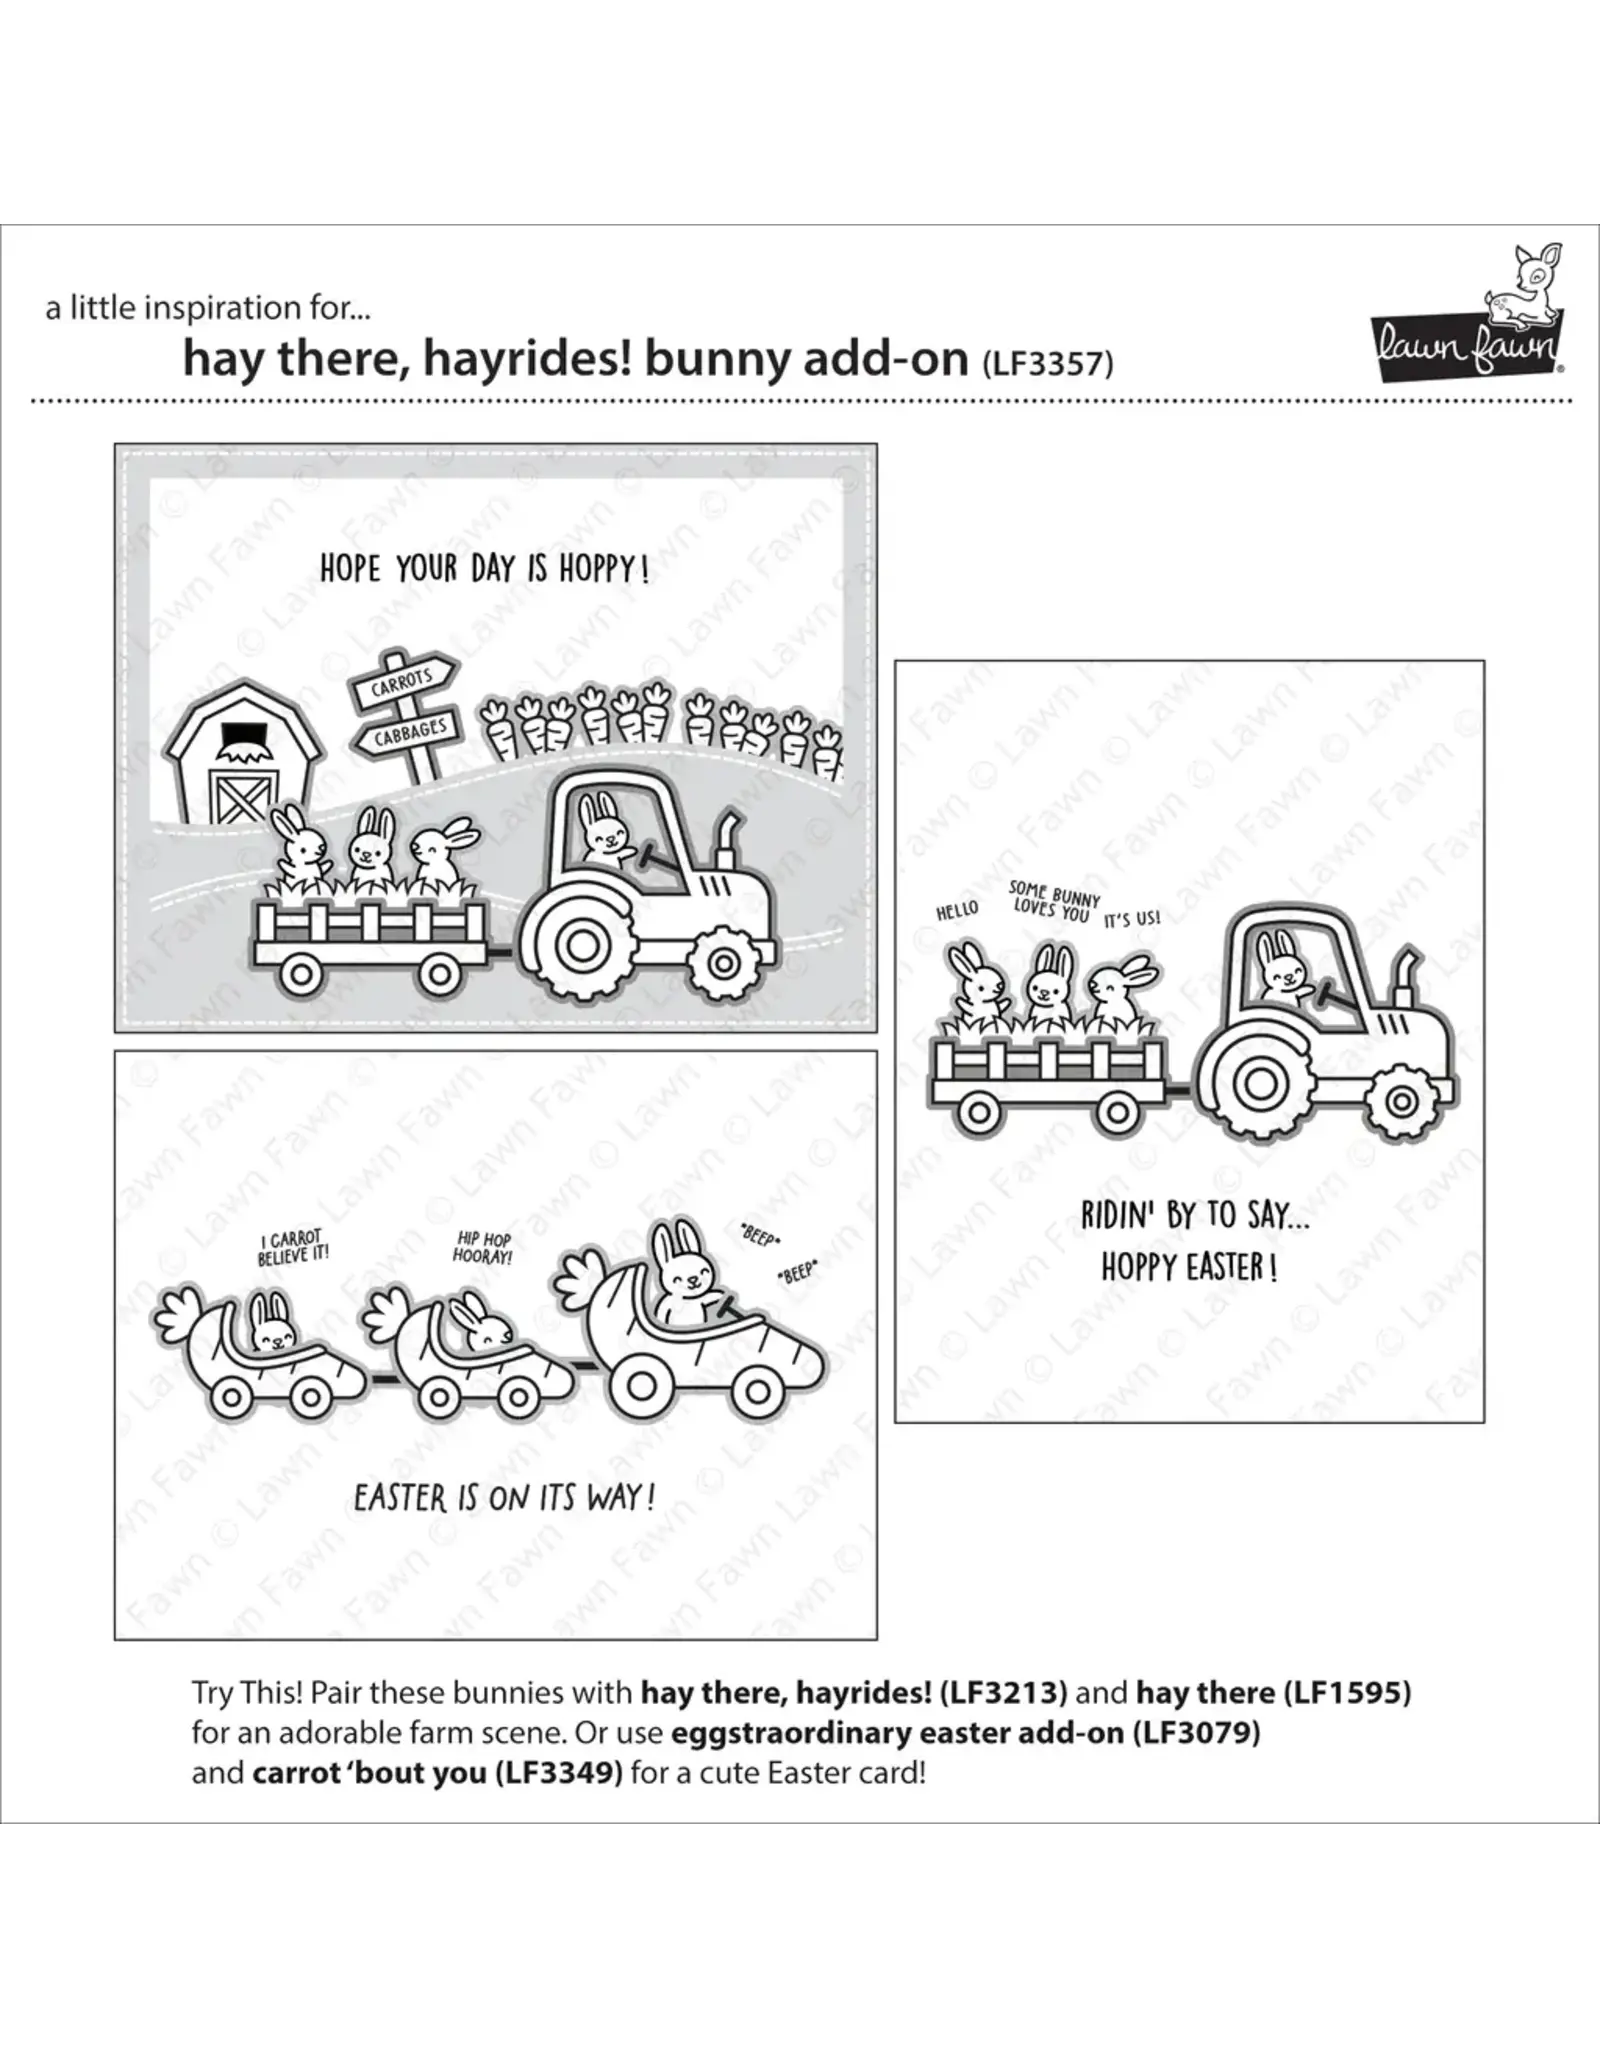 LAWN FAWN LAWN FAWN HAY THERE, HAYRIDES! BUNNY ADD-ON CLEAR STAMP SET